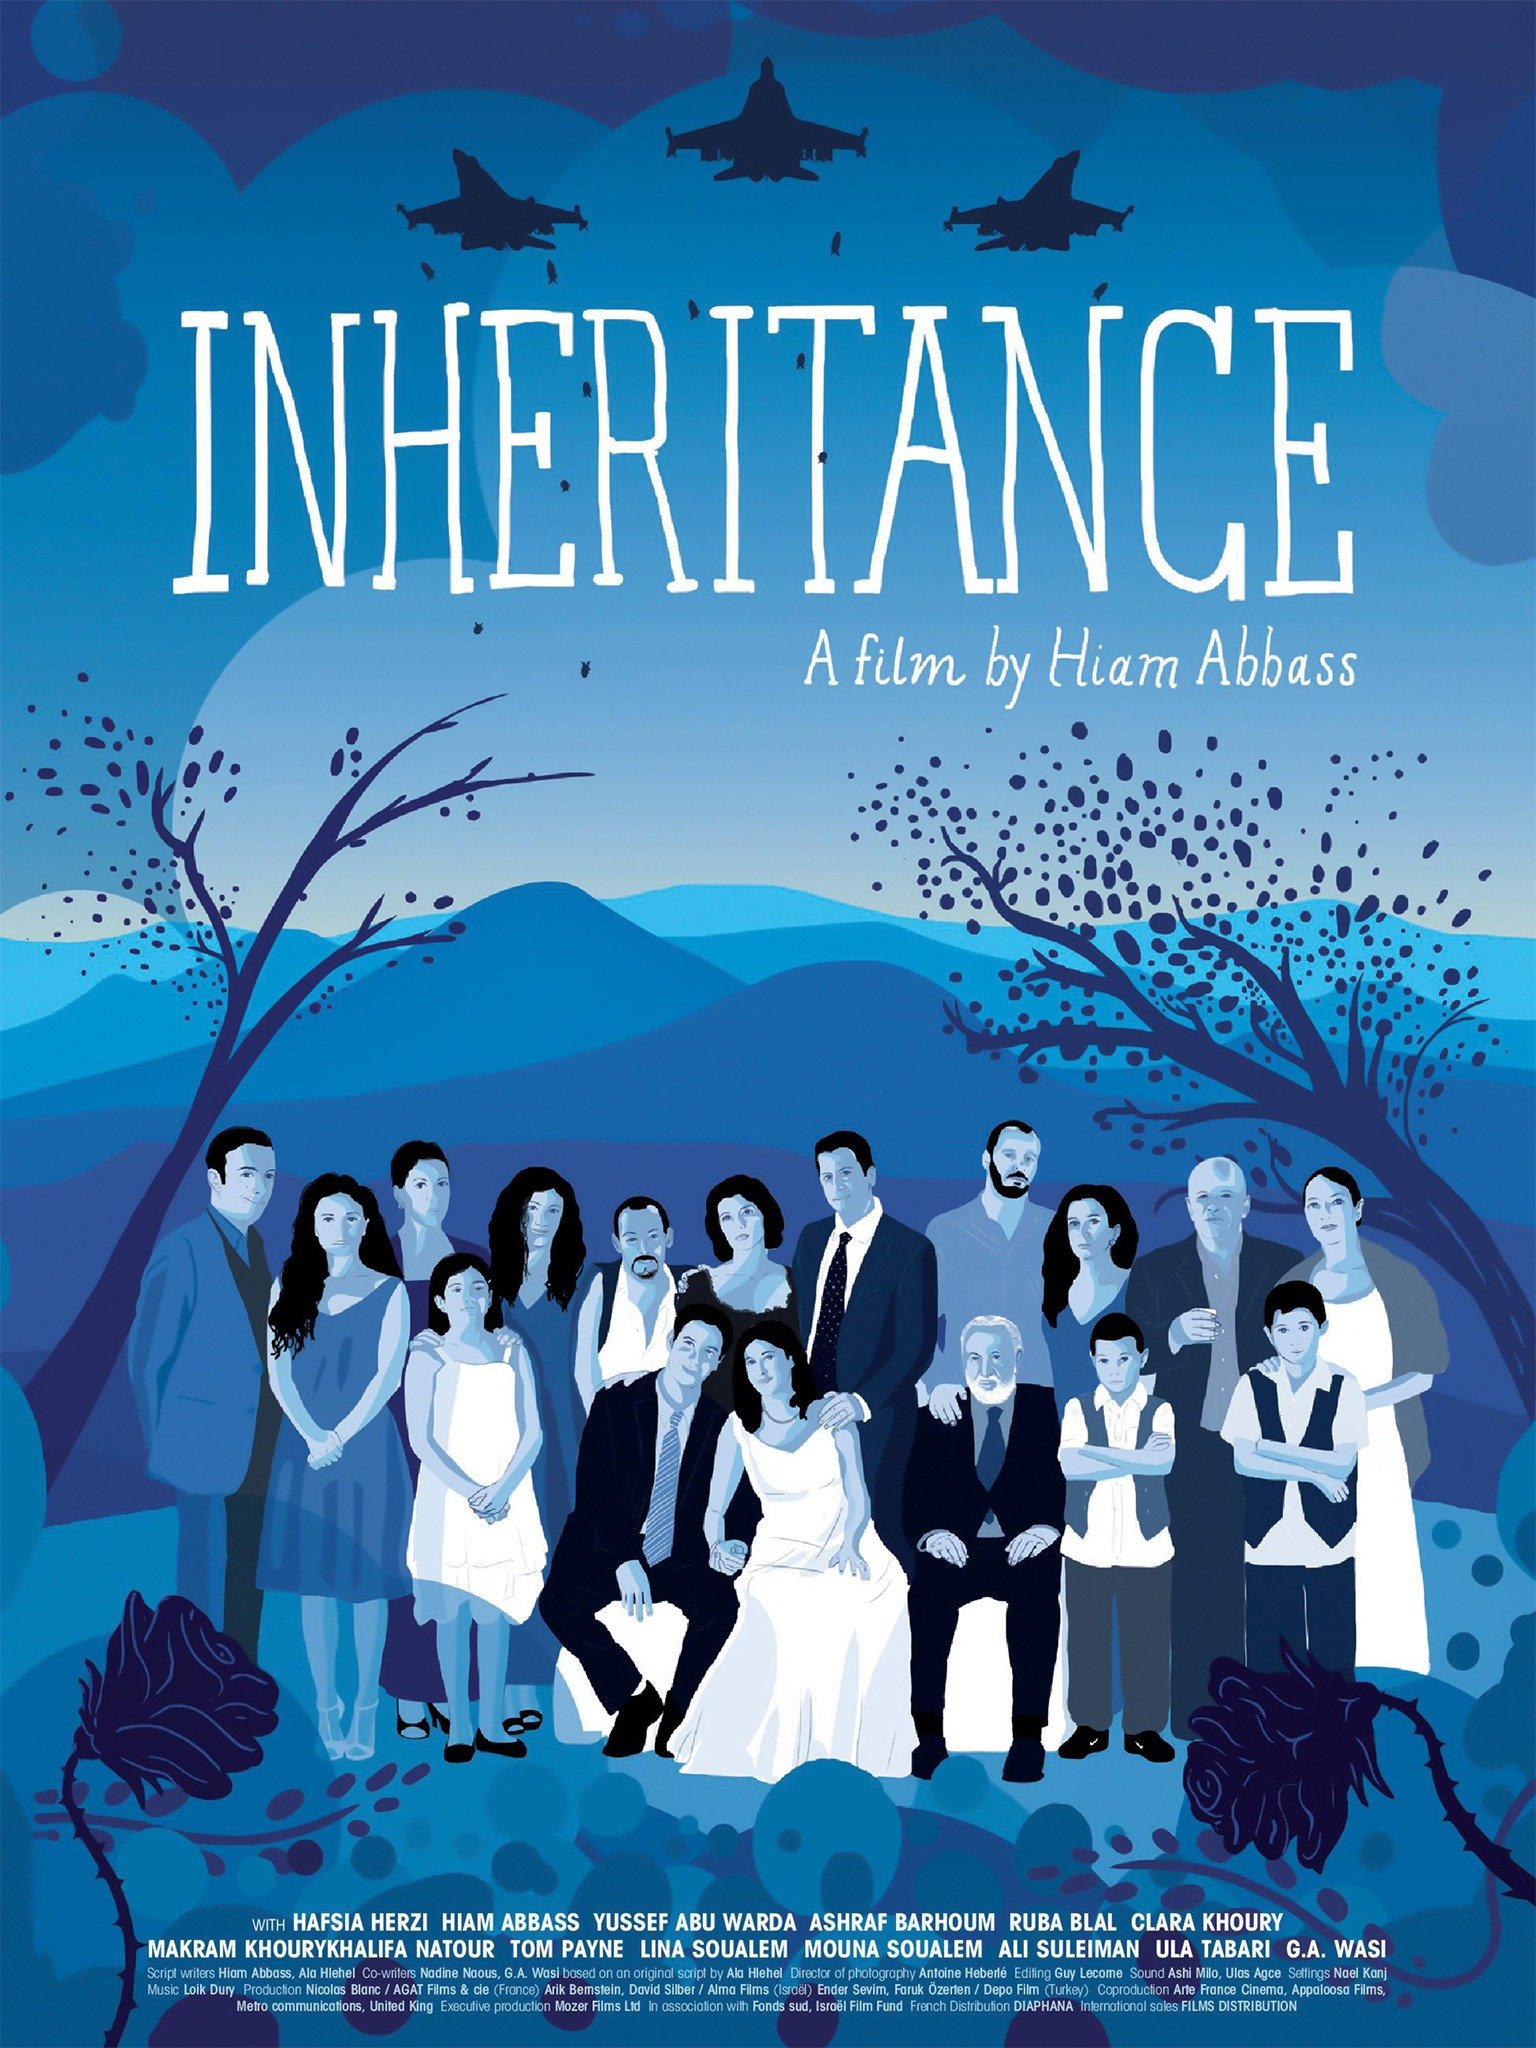 inheritance movie review rotten tomatoes